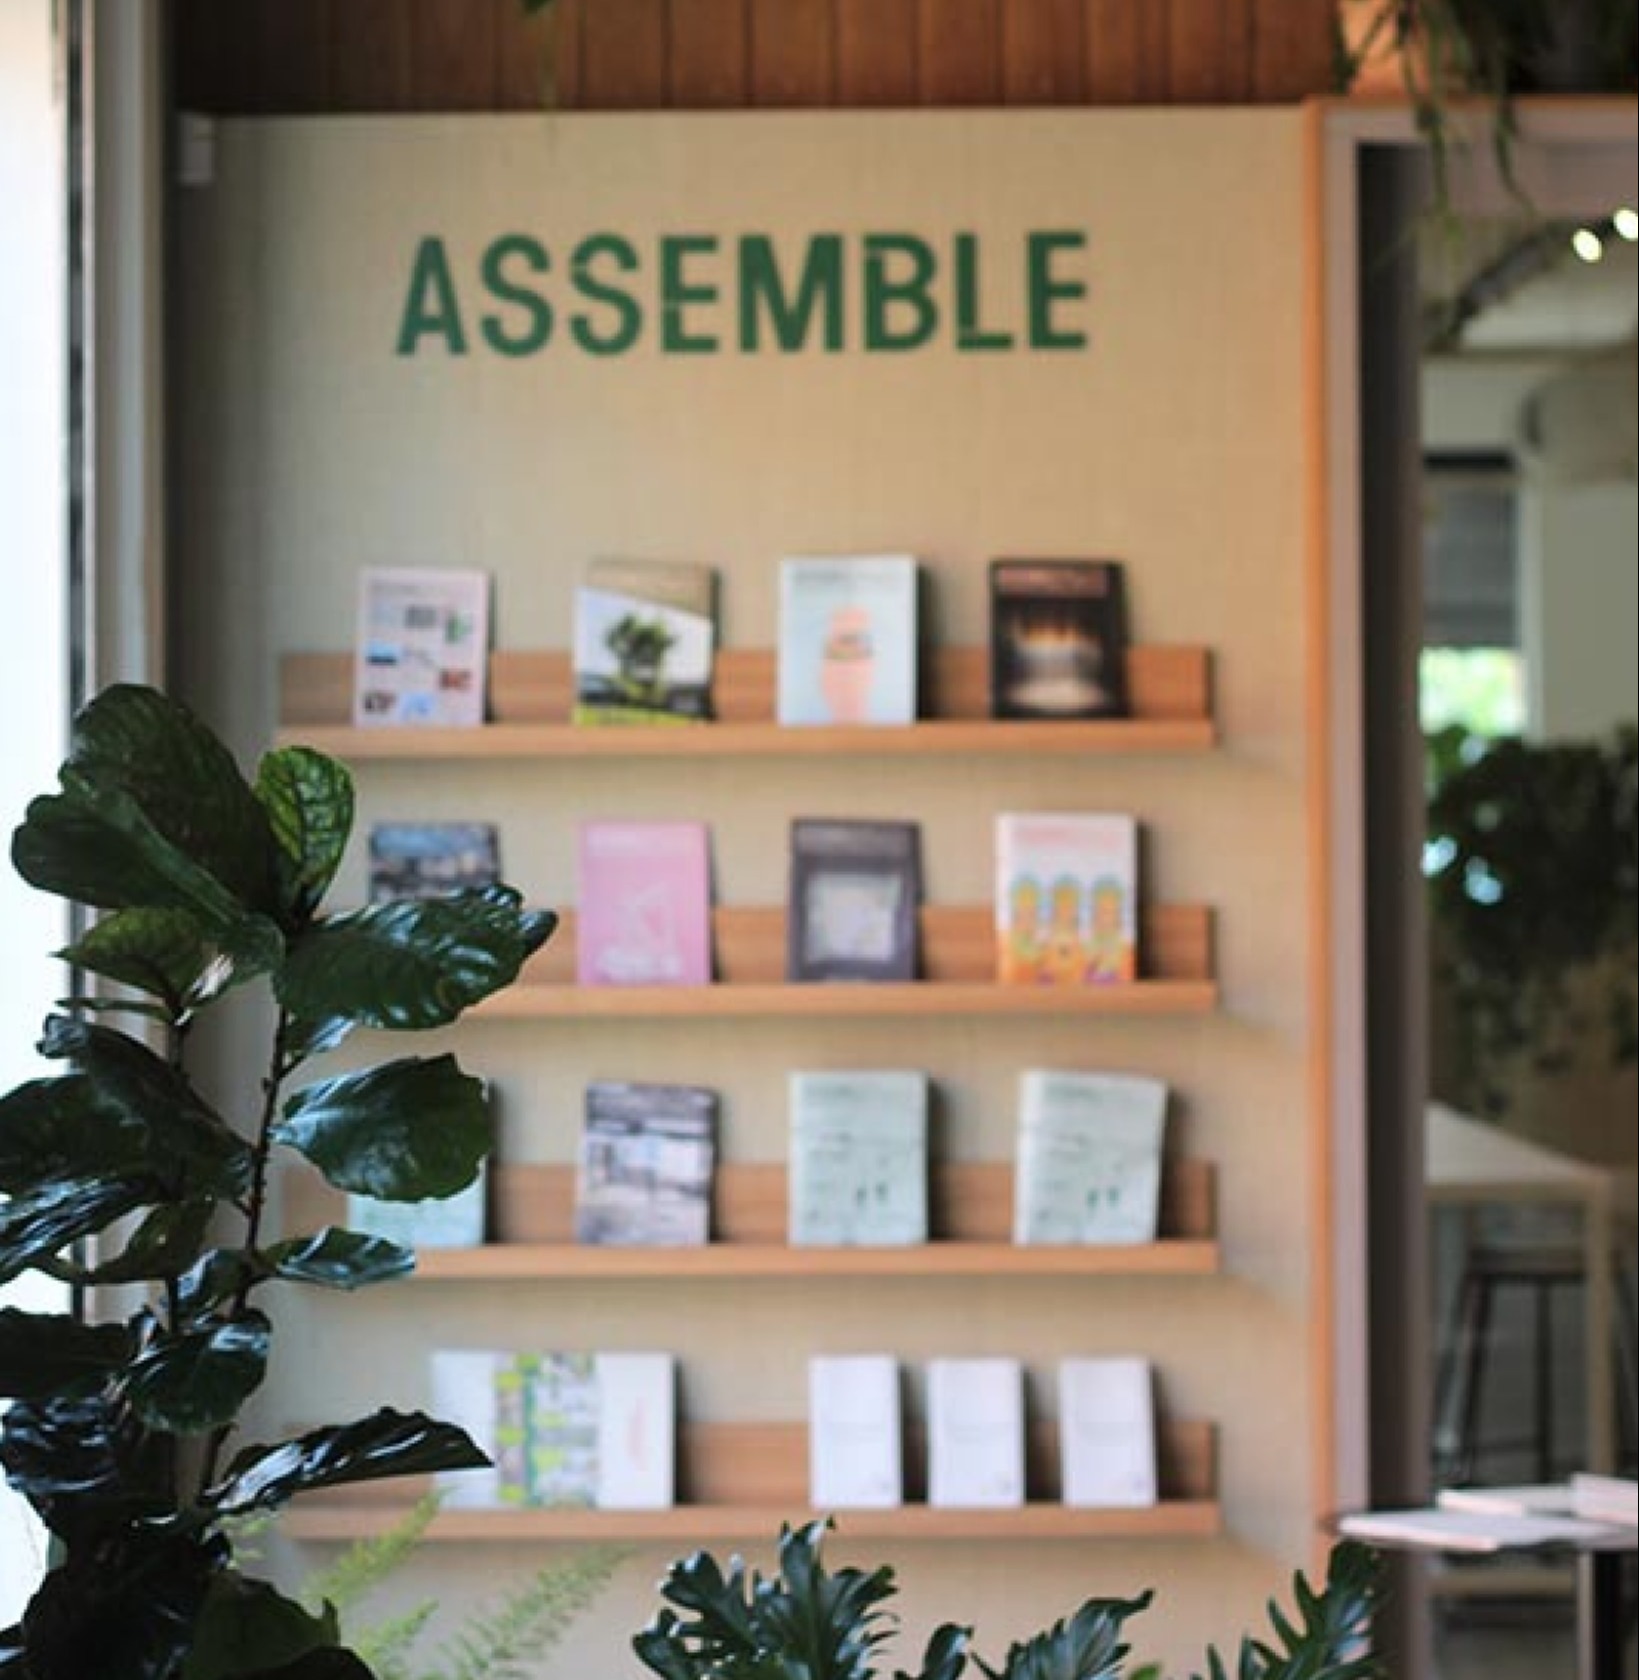 A bookshelf at the Assemble studio with copies of Assemble Papers